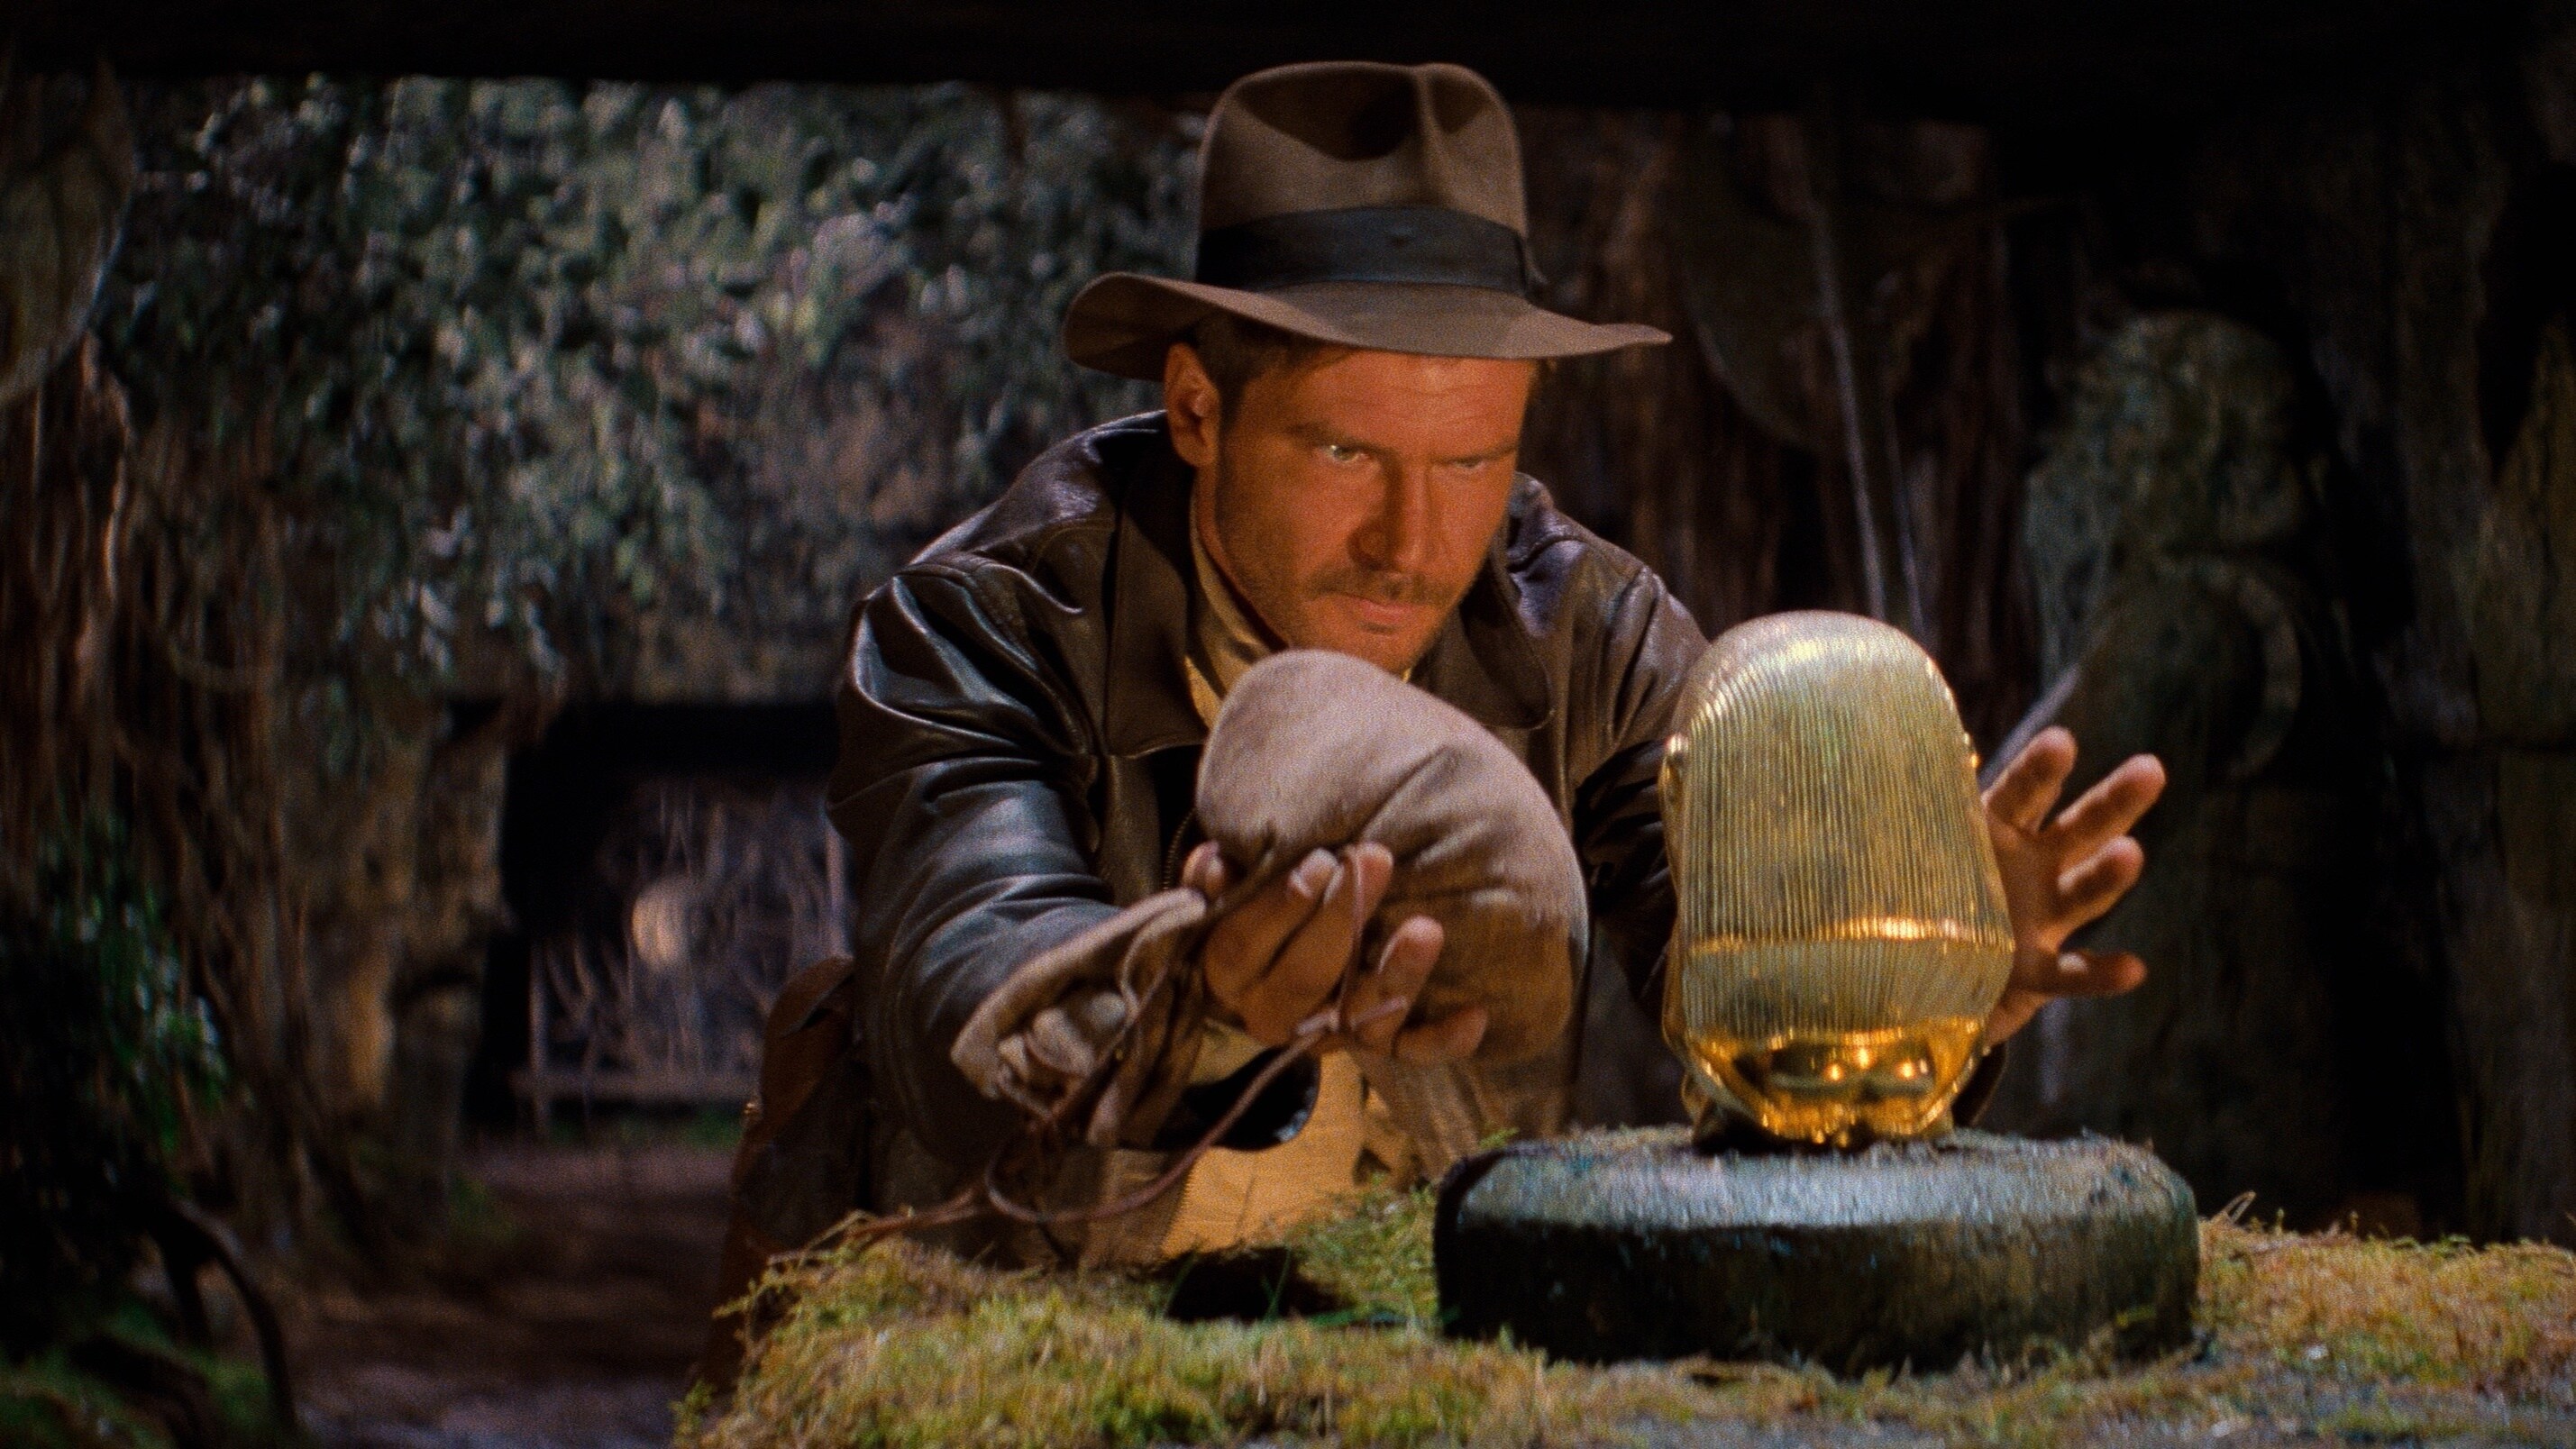 In Celebration Of The Upcoming Theatrical Release Of “Indiana Jones And The Dial Of Destiny,” The “Indiana Jones” Collection Of Movies Swing Onto Disney+ On May 31 